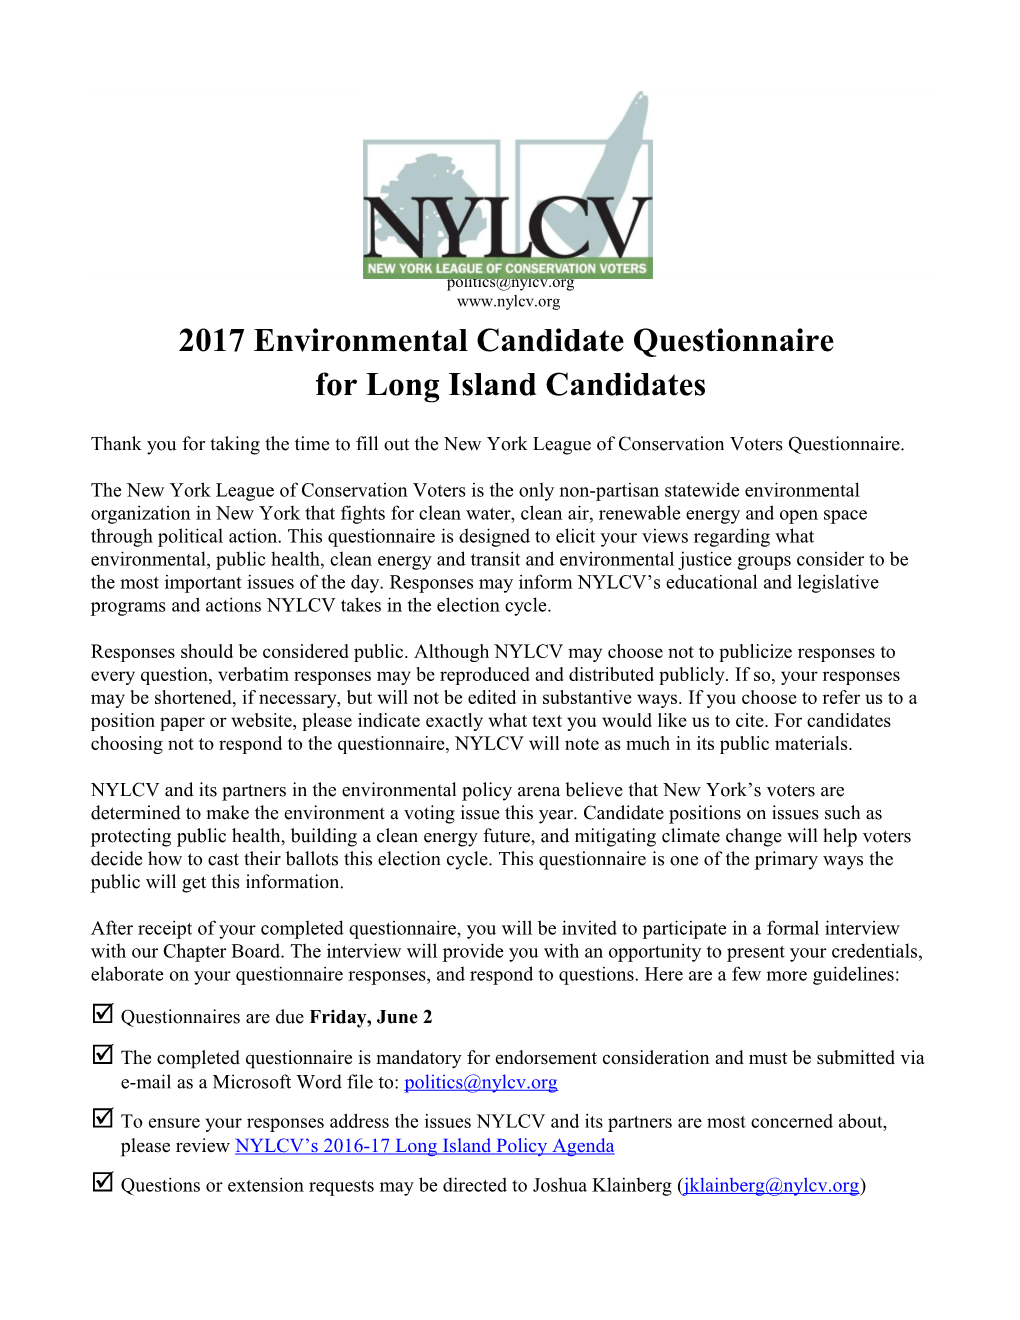 2017 Environmental Candidate Questionnaire for Long Island Candidates